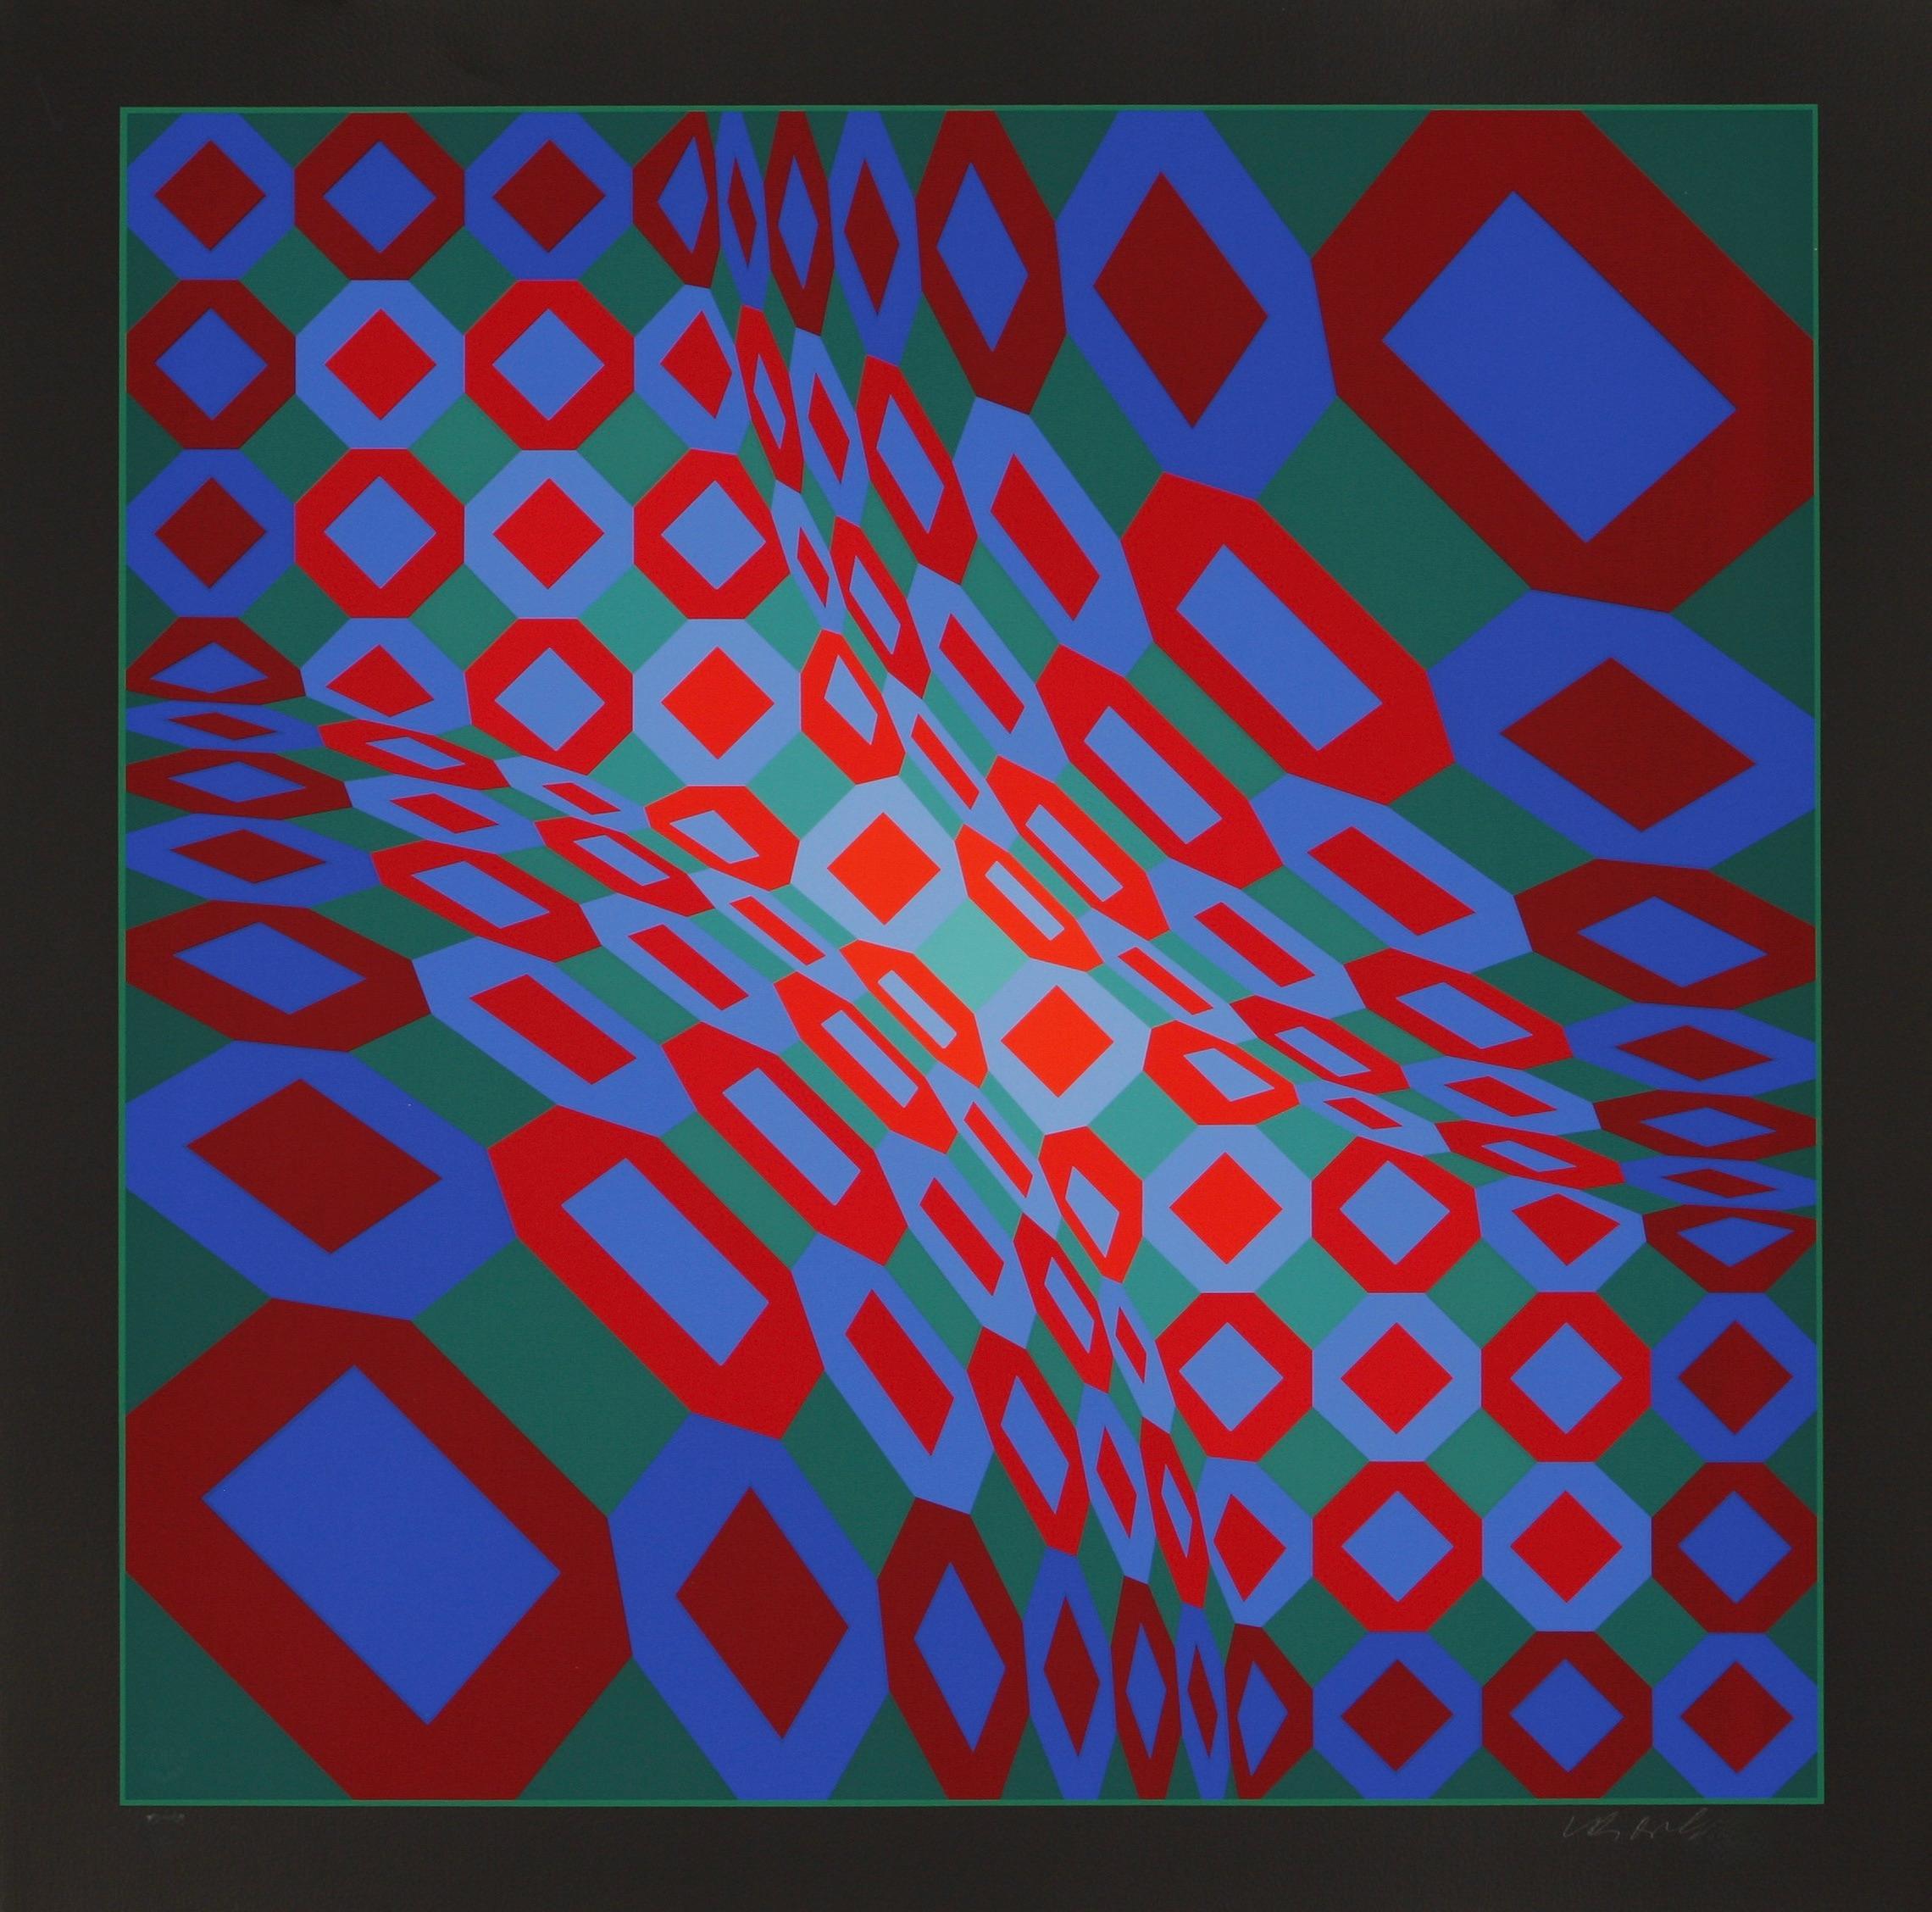 Viva - Print by Victor Vasarely